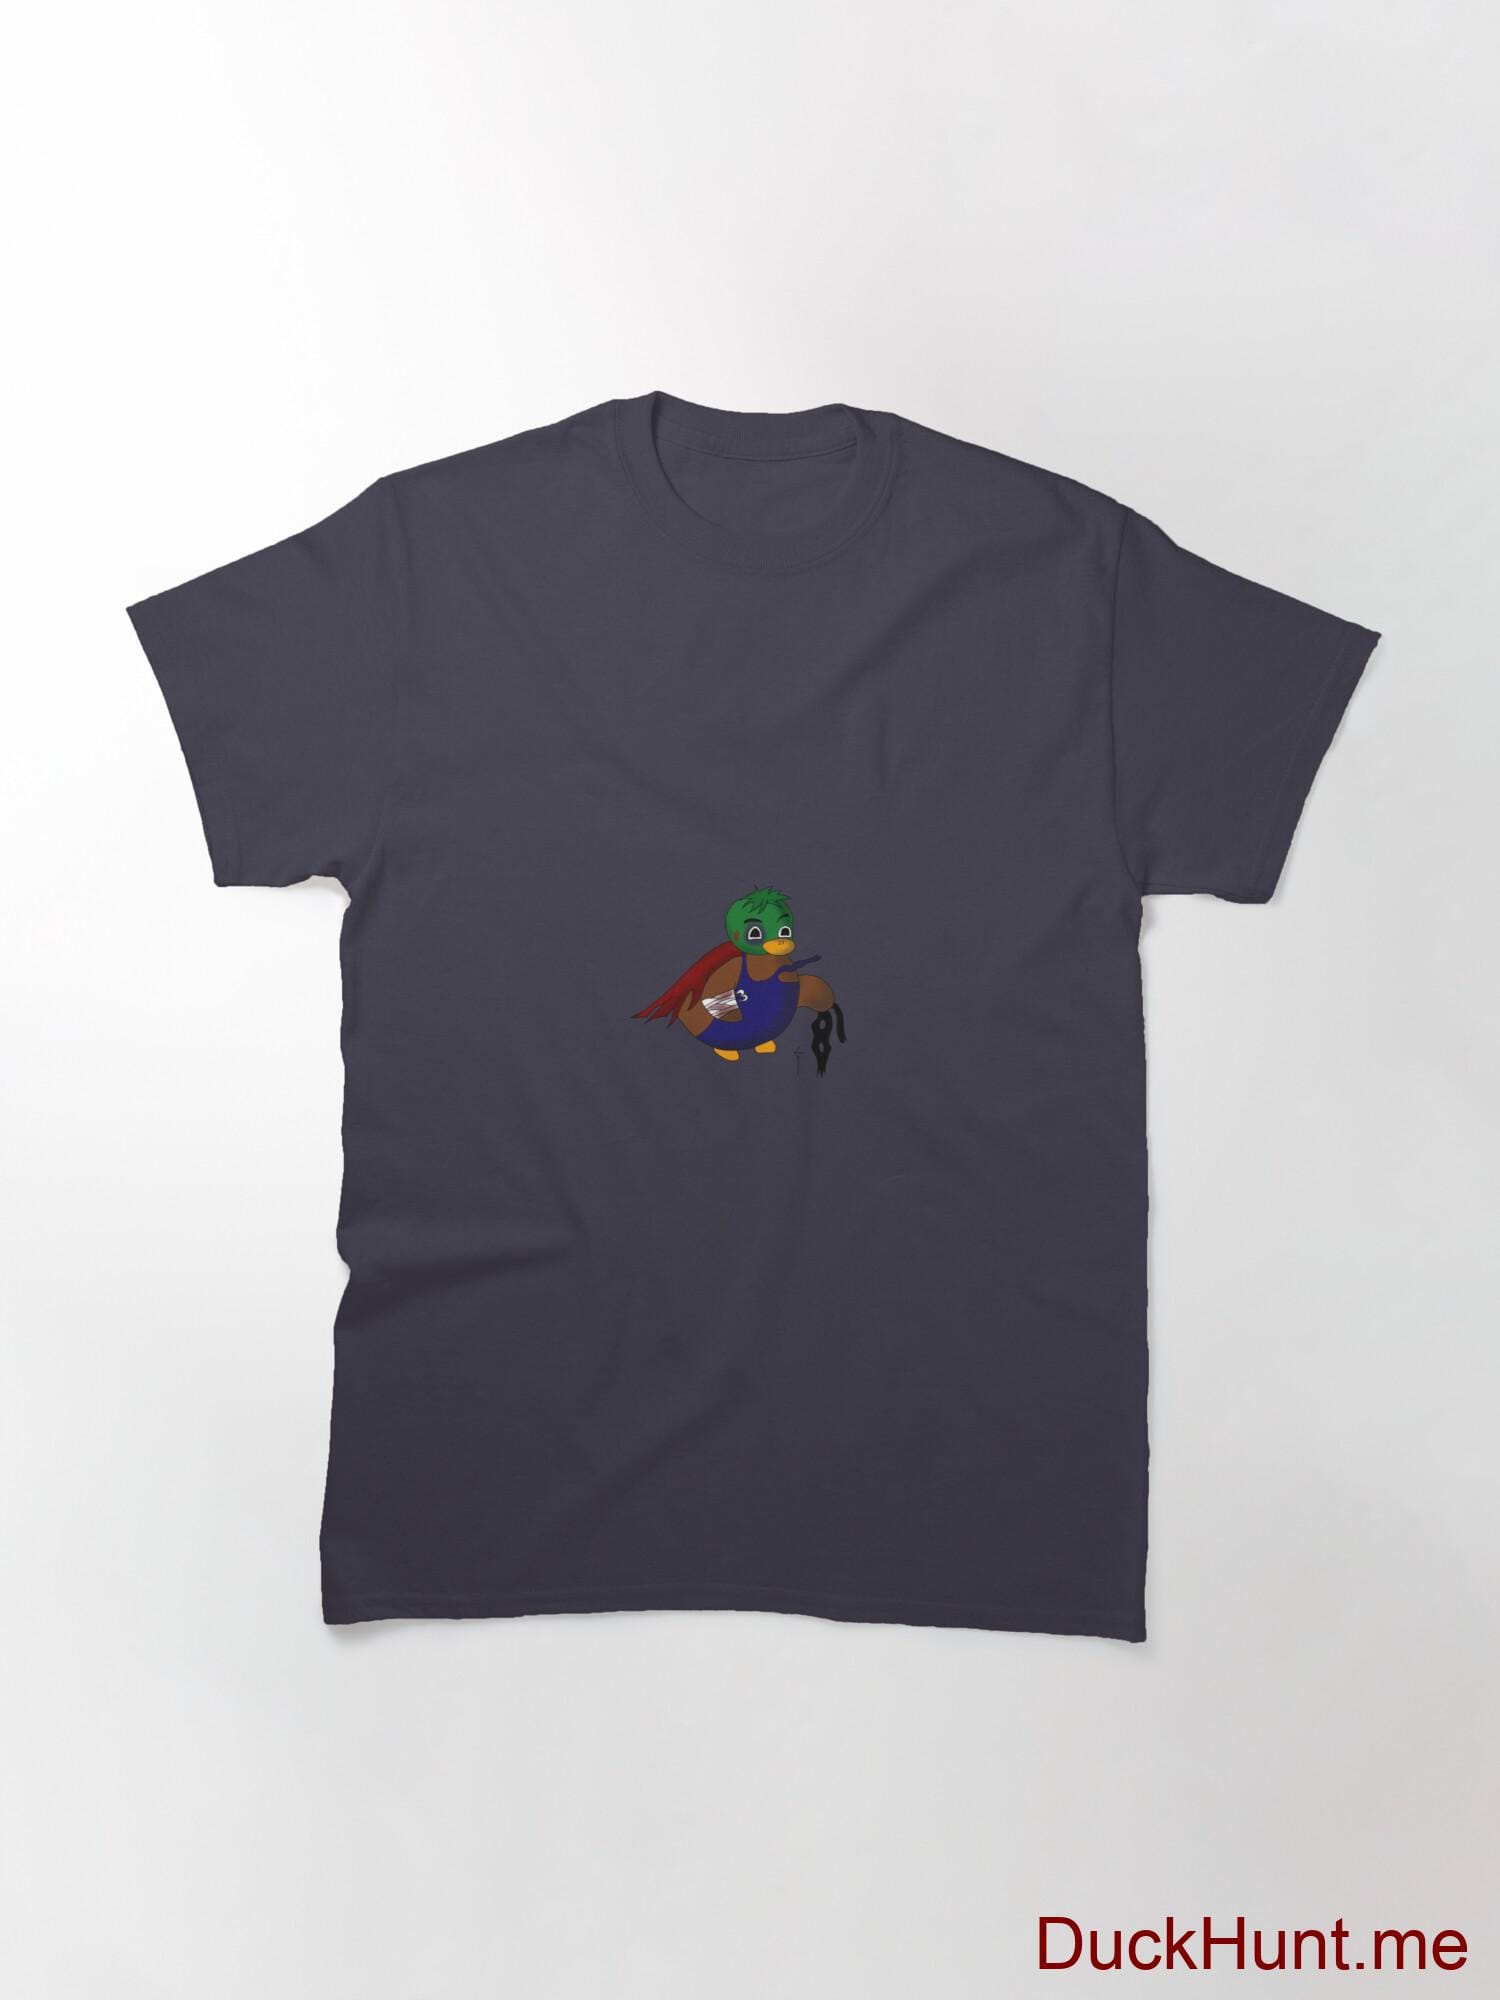 Dead DuckHunt Boss (smokeless) Navy Classic T-Shirt (Front printed) alternative image 2